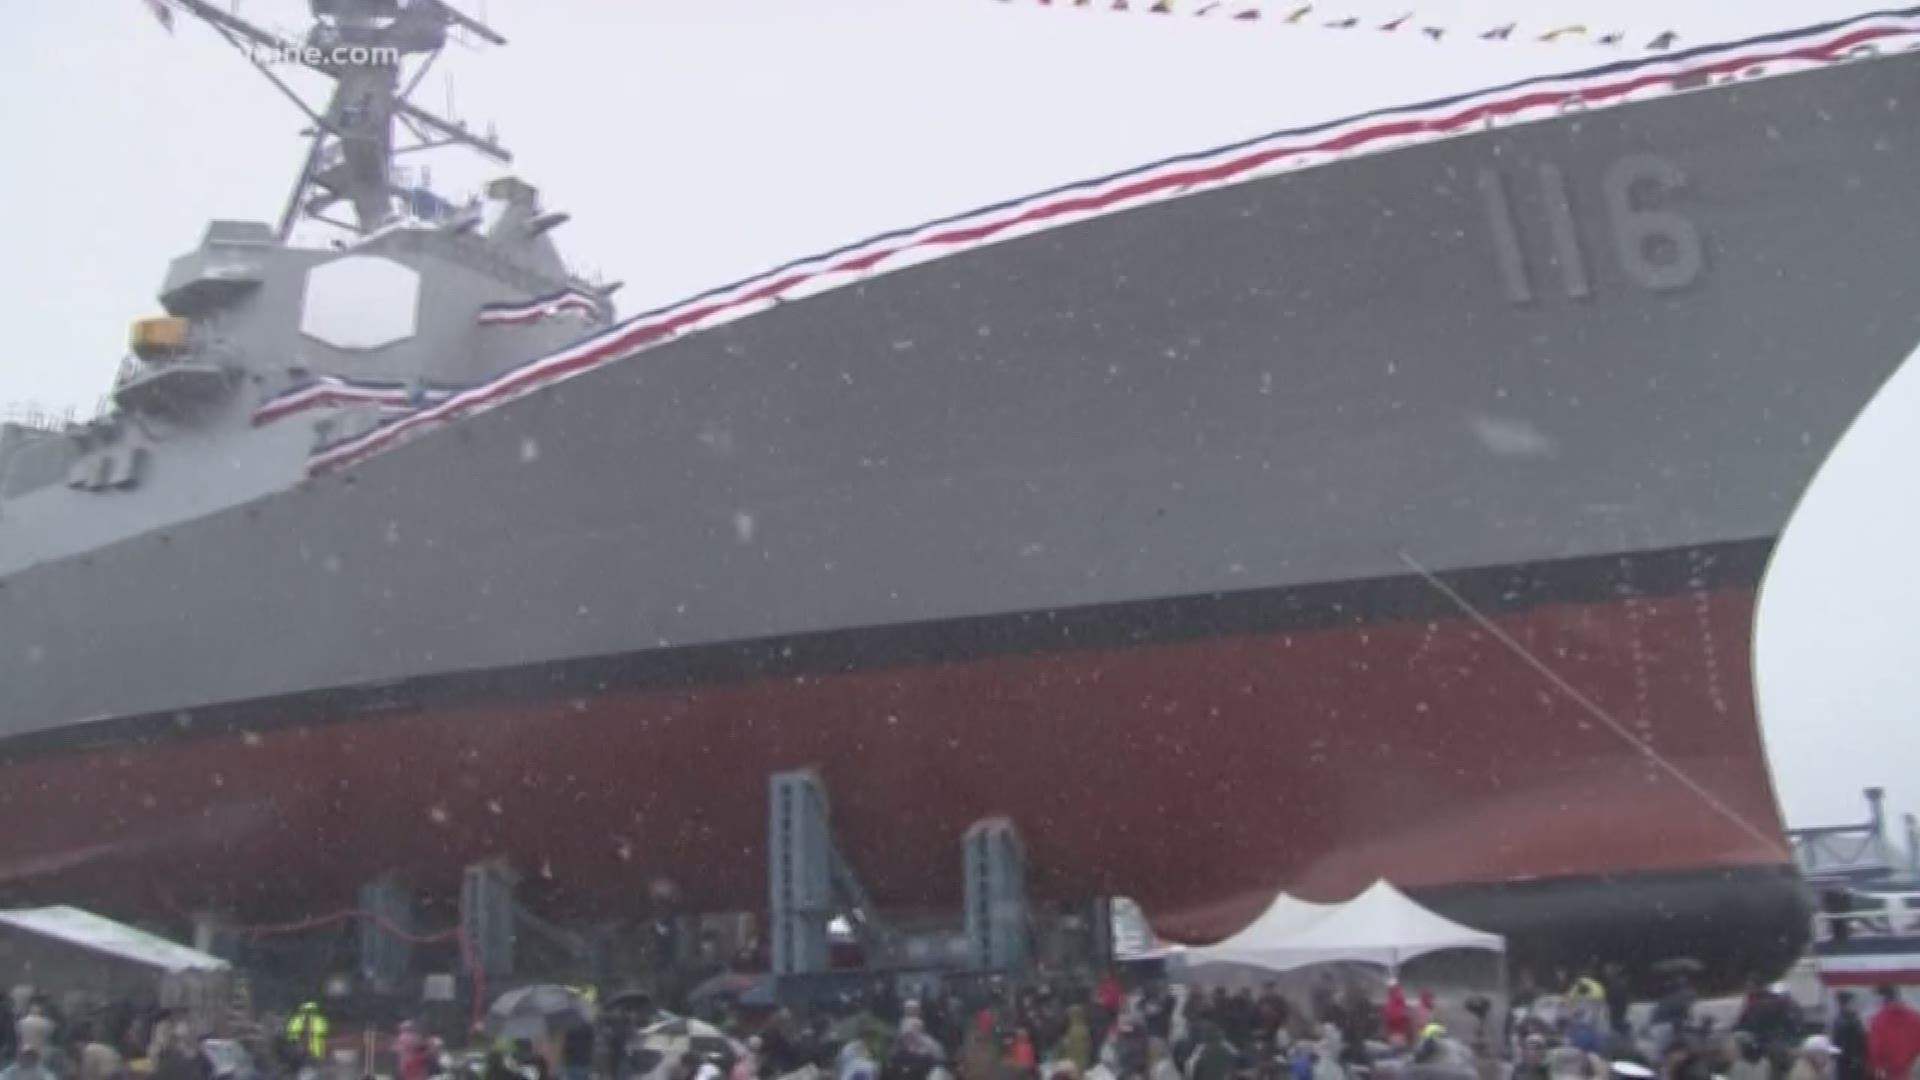 Bath Iron Works has reportedly hired about 1,000 works this year and is looking to hire about a thousand more by year's end.